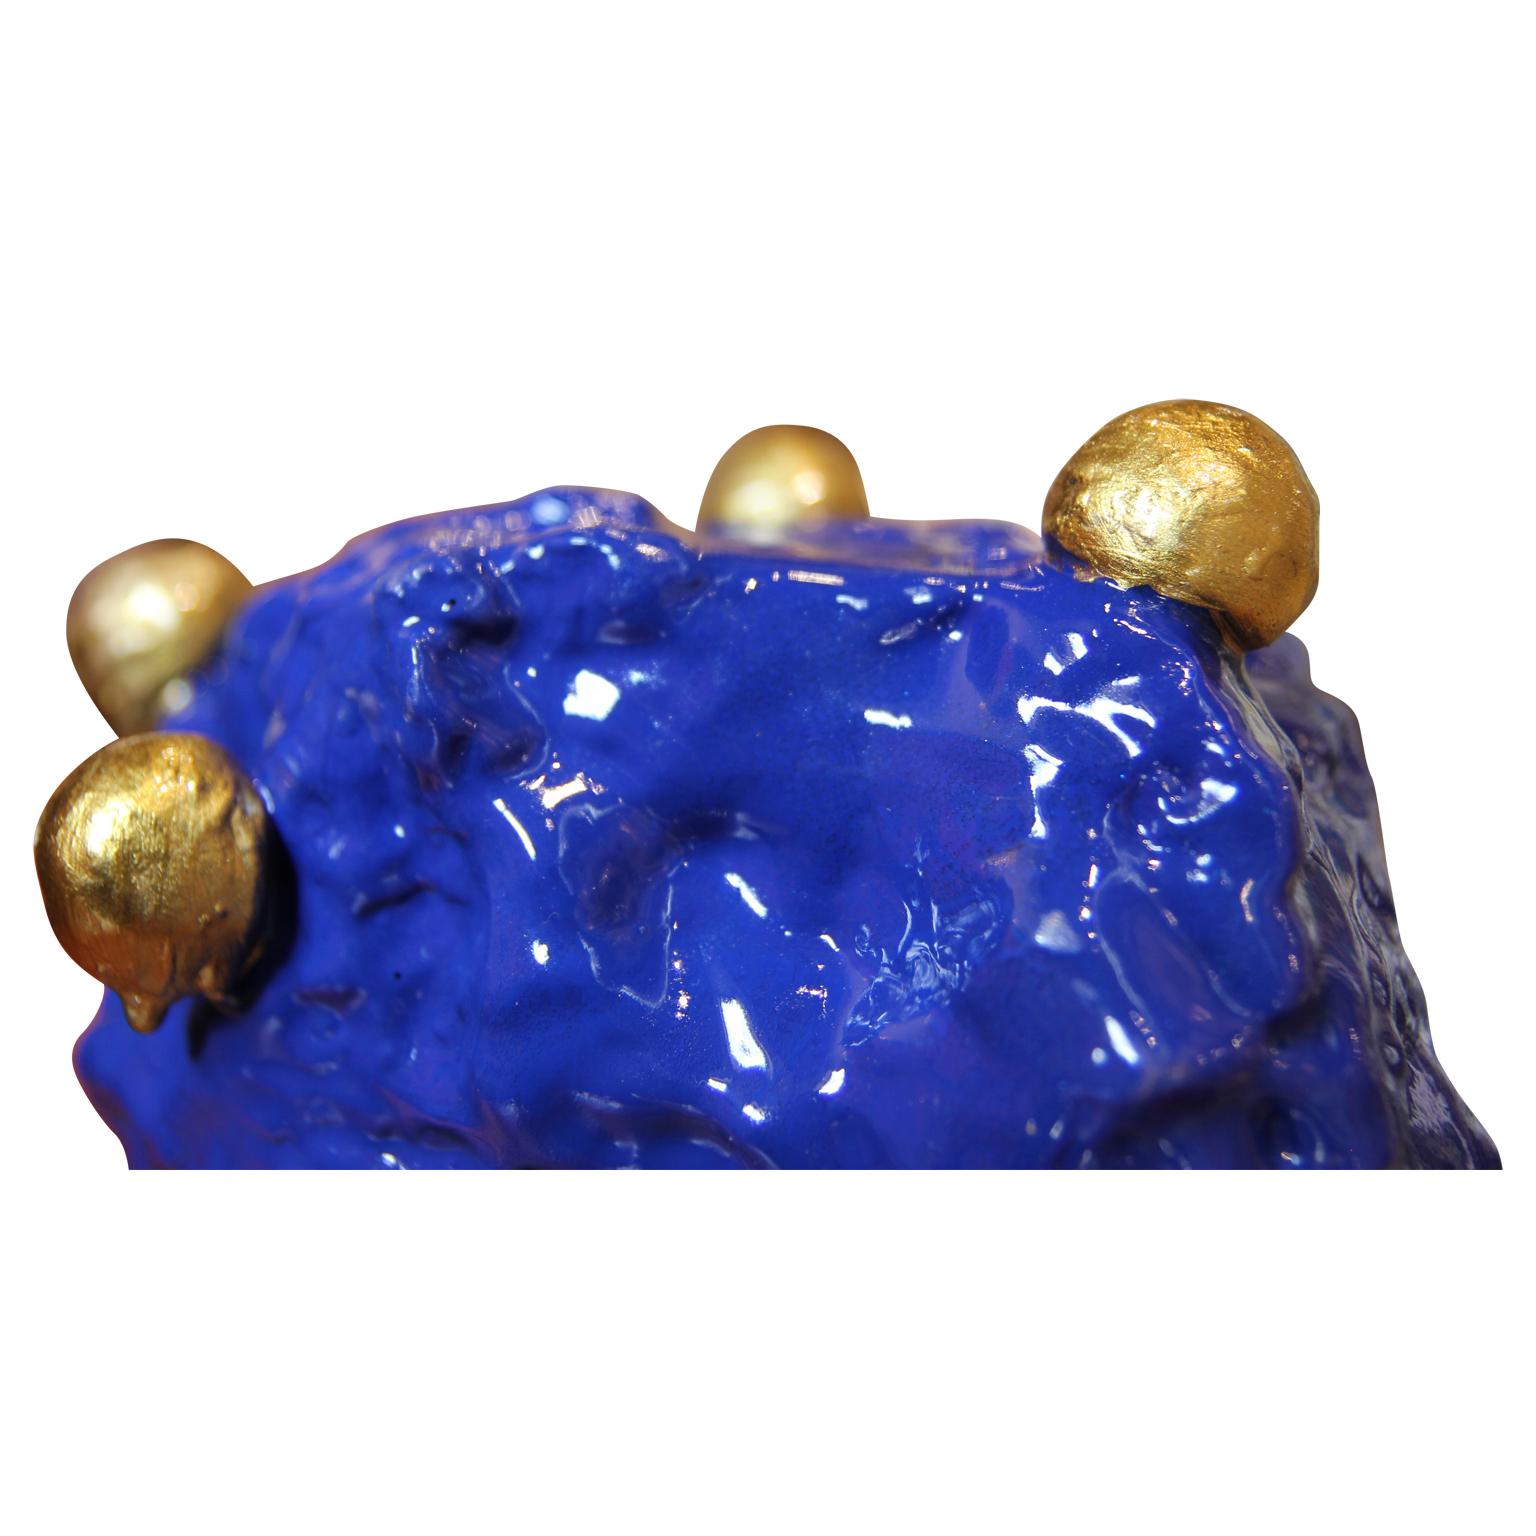 “I Know You Know I Love Yew” Blue and Gold Decorative Sculpture - Purple Abstract Sculpture by Jude Rosemond